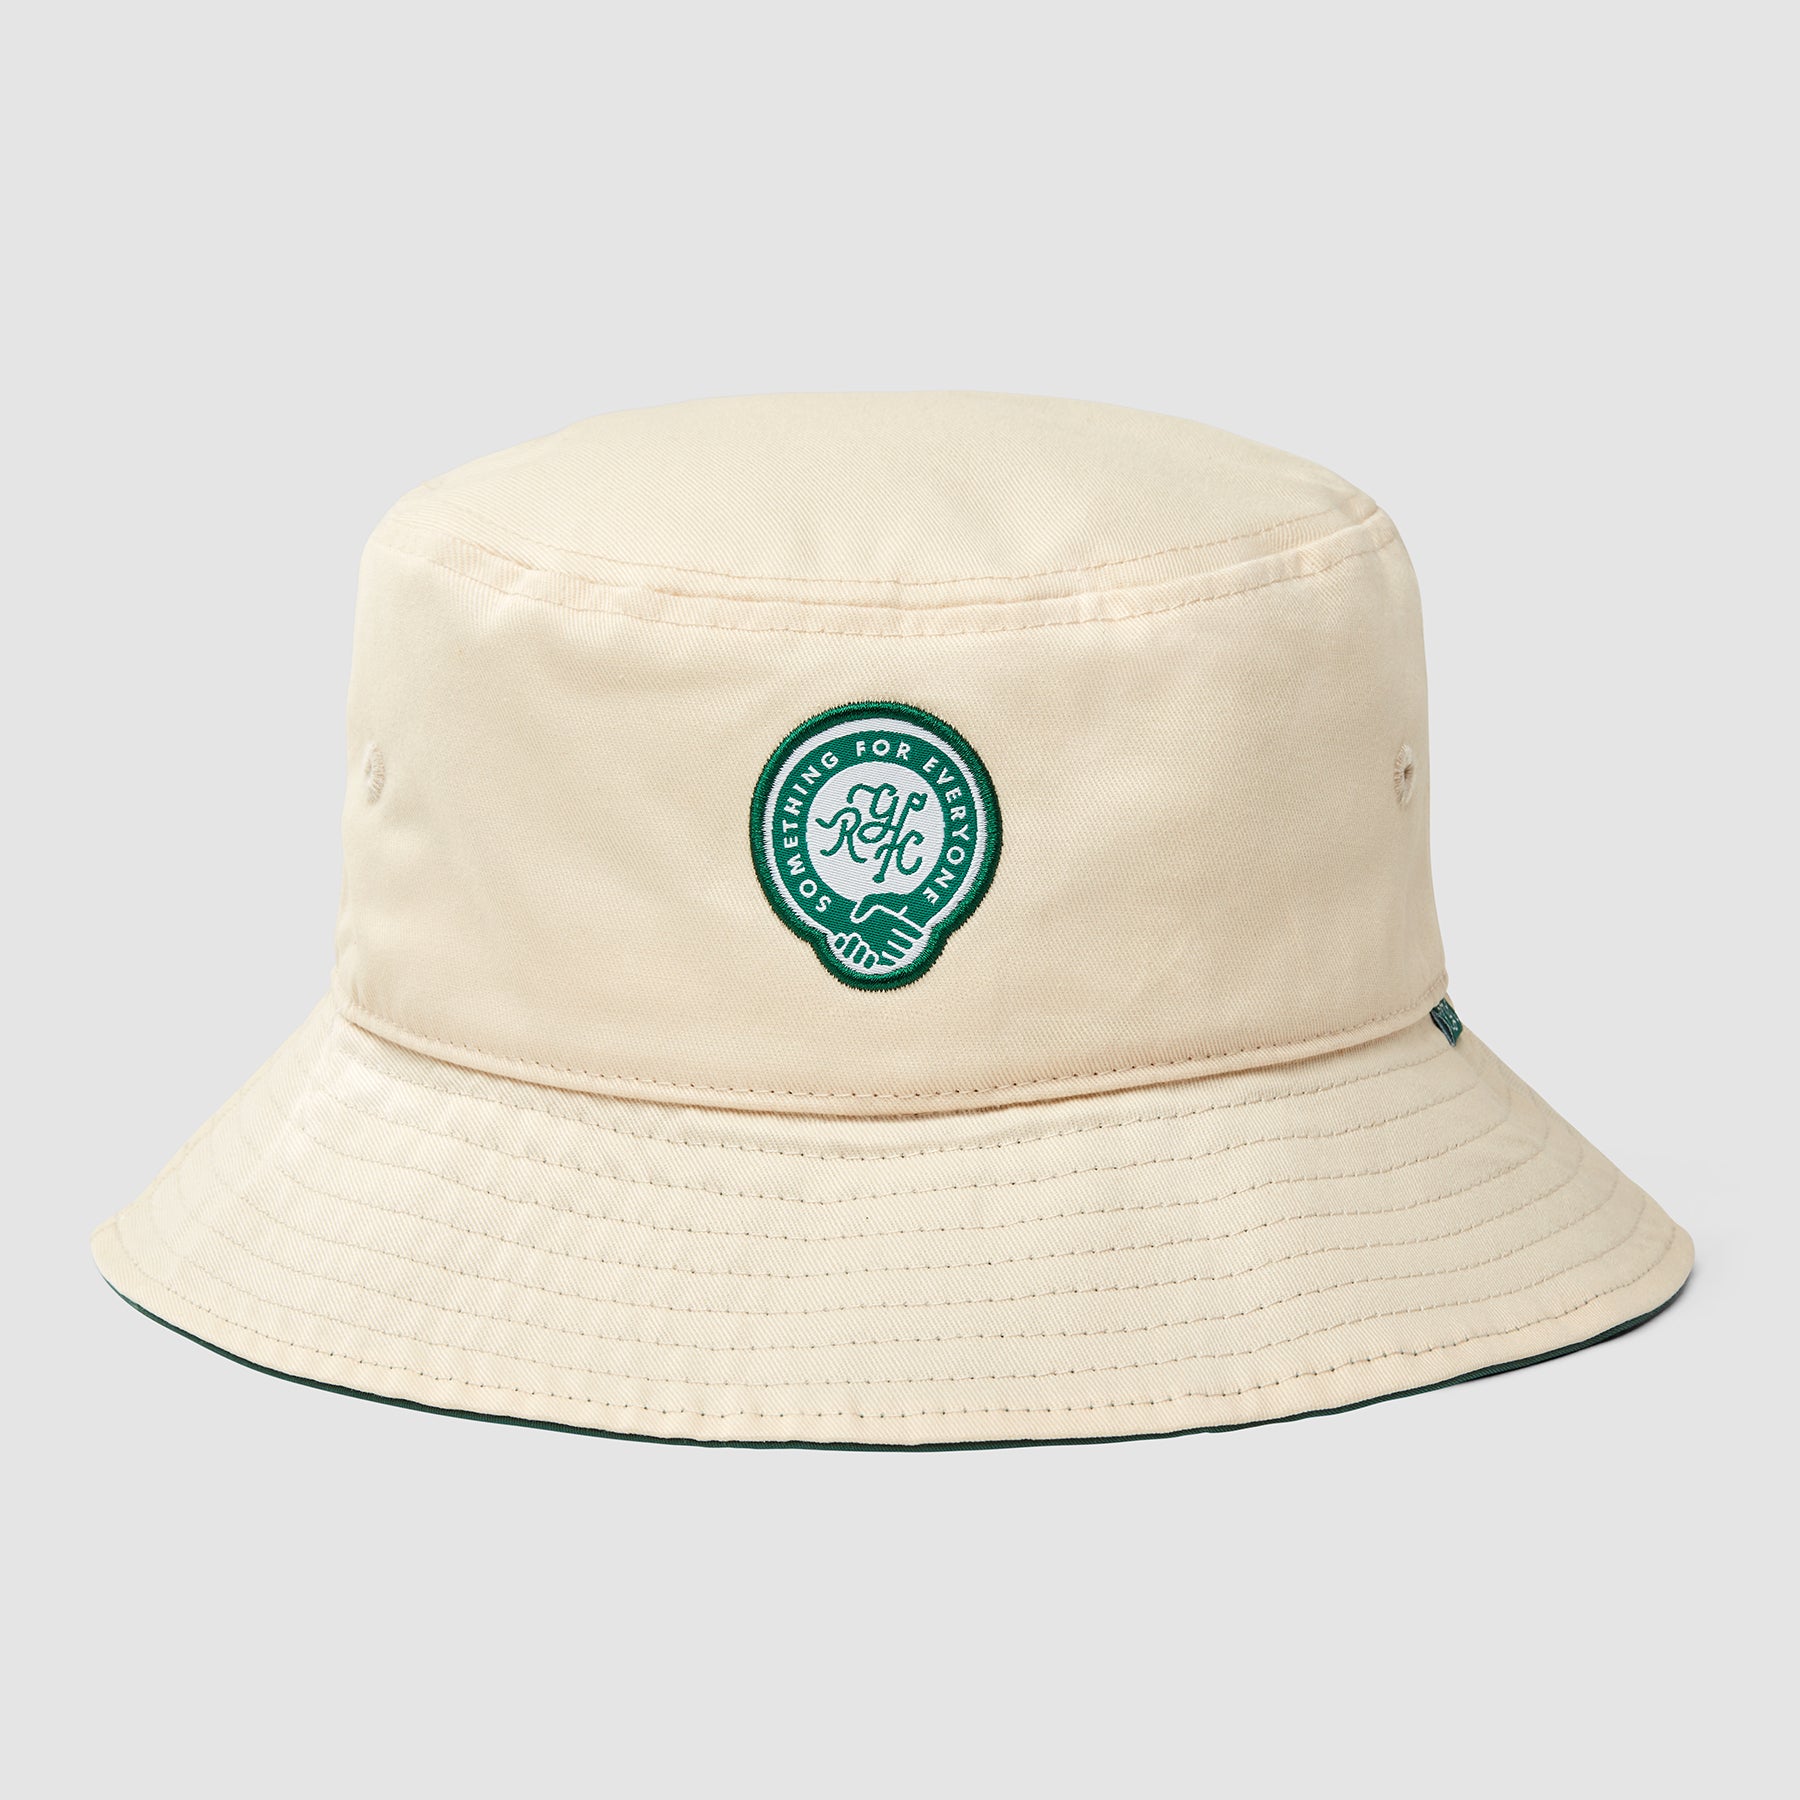 S.F.E. Bucket Hat (Natural)